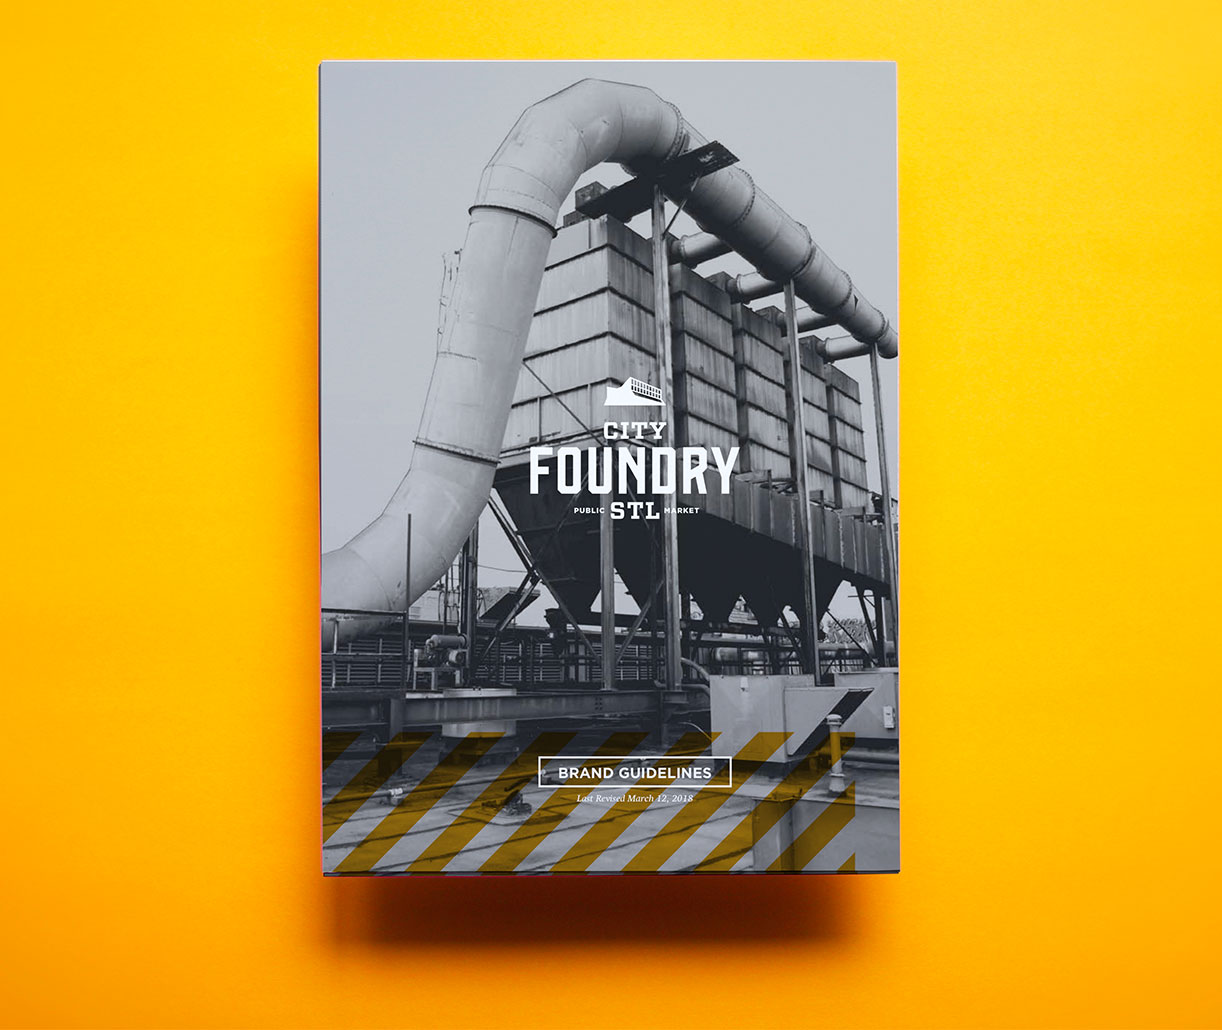 City Foundry brand guidelines